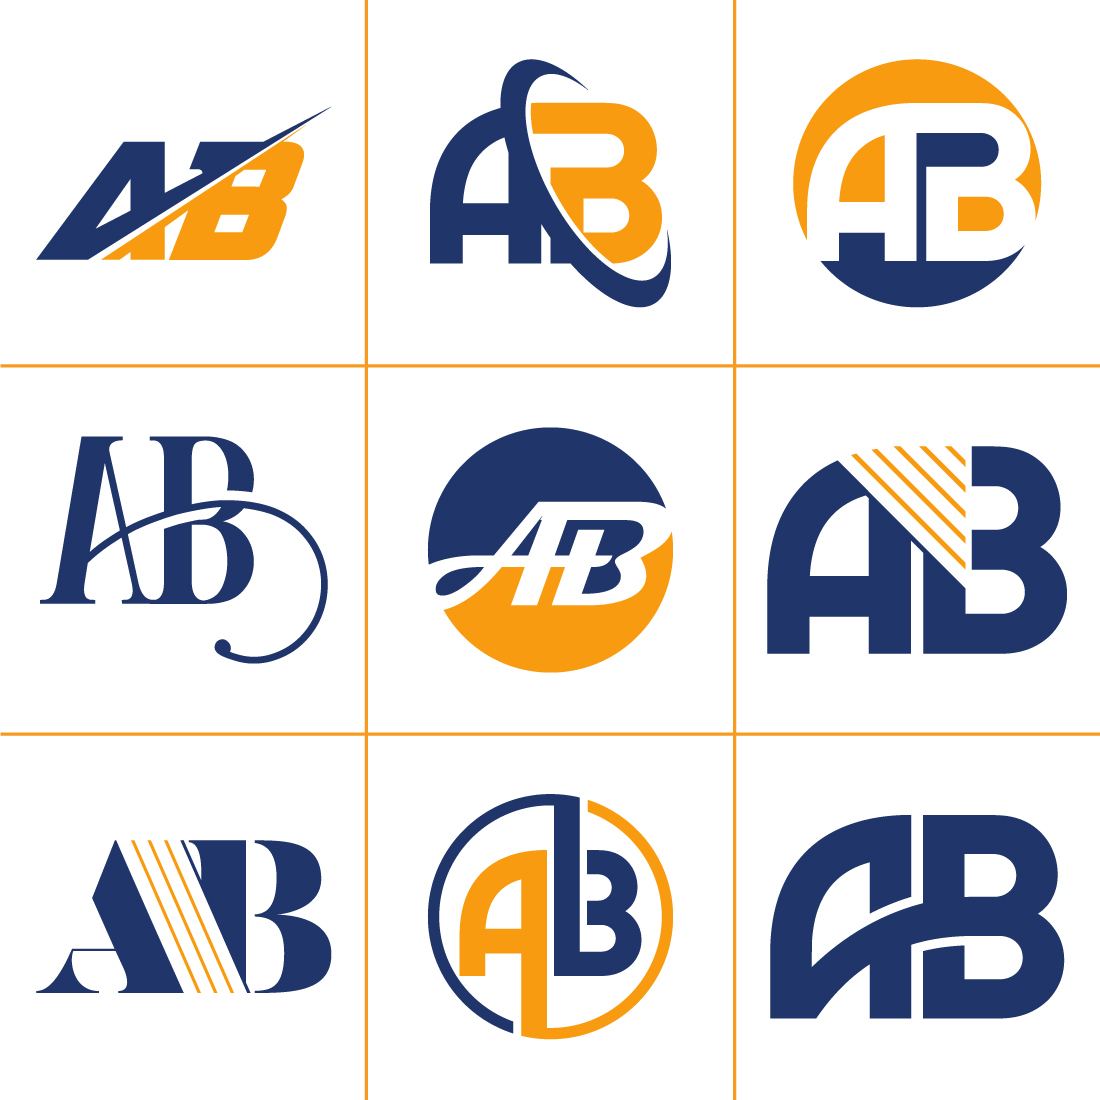 A B Initial Letter Logo Design, Graphic Alphabet Symbol for Corporate Business Identity cover image.